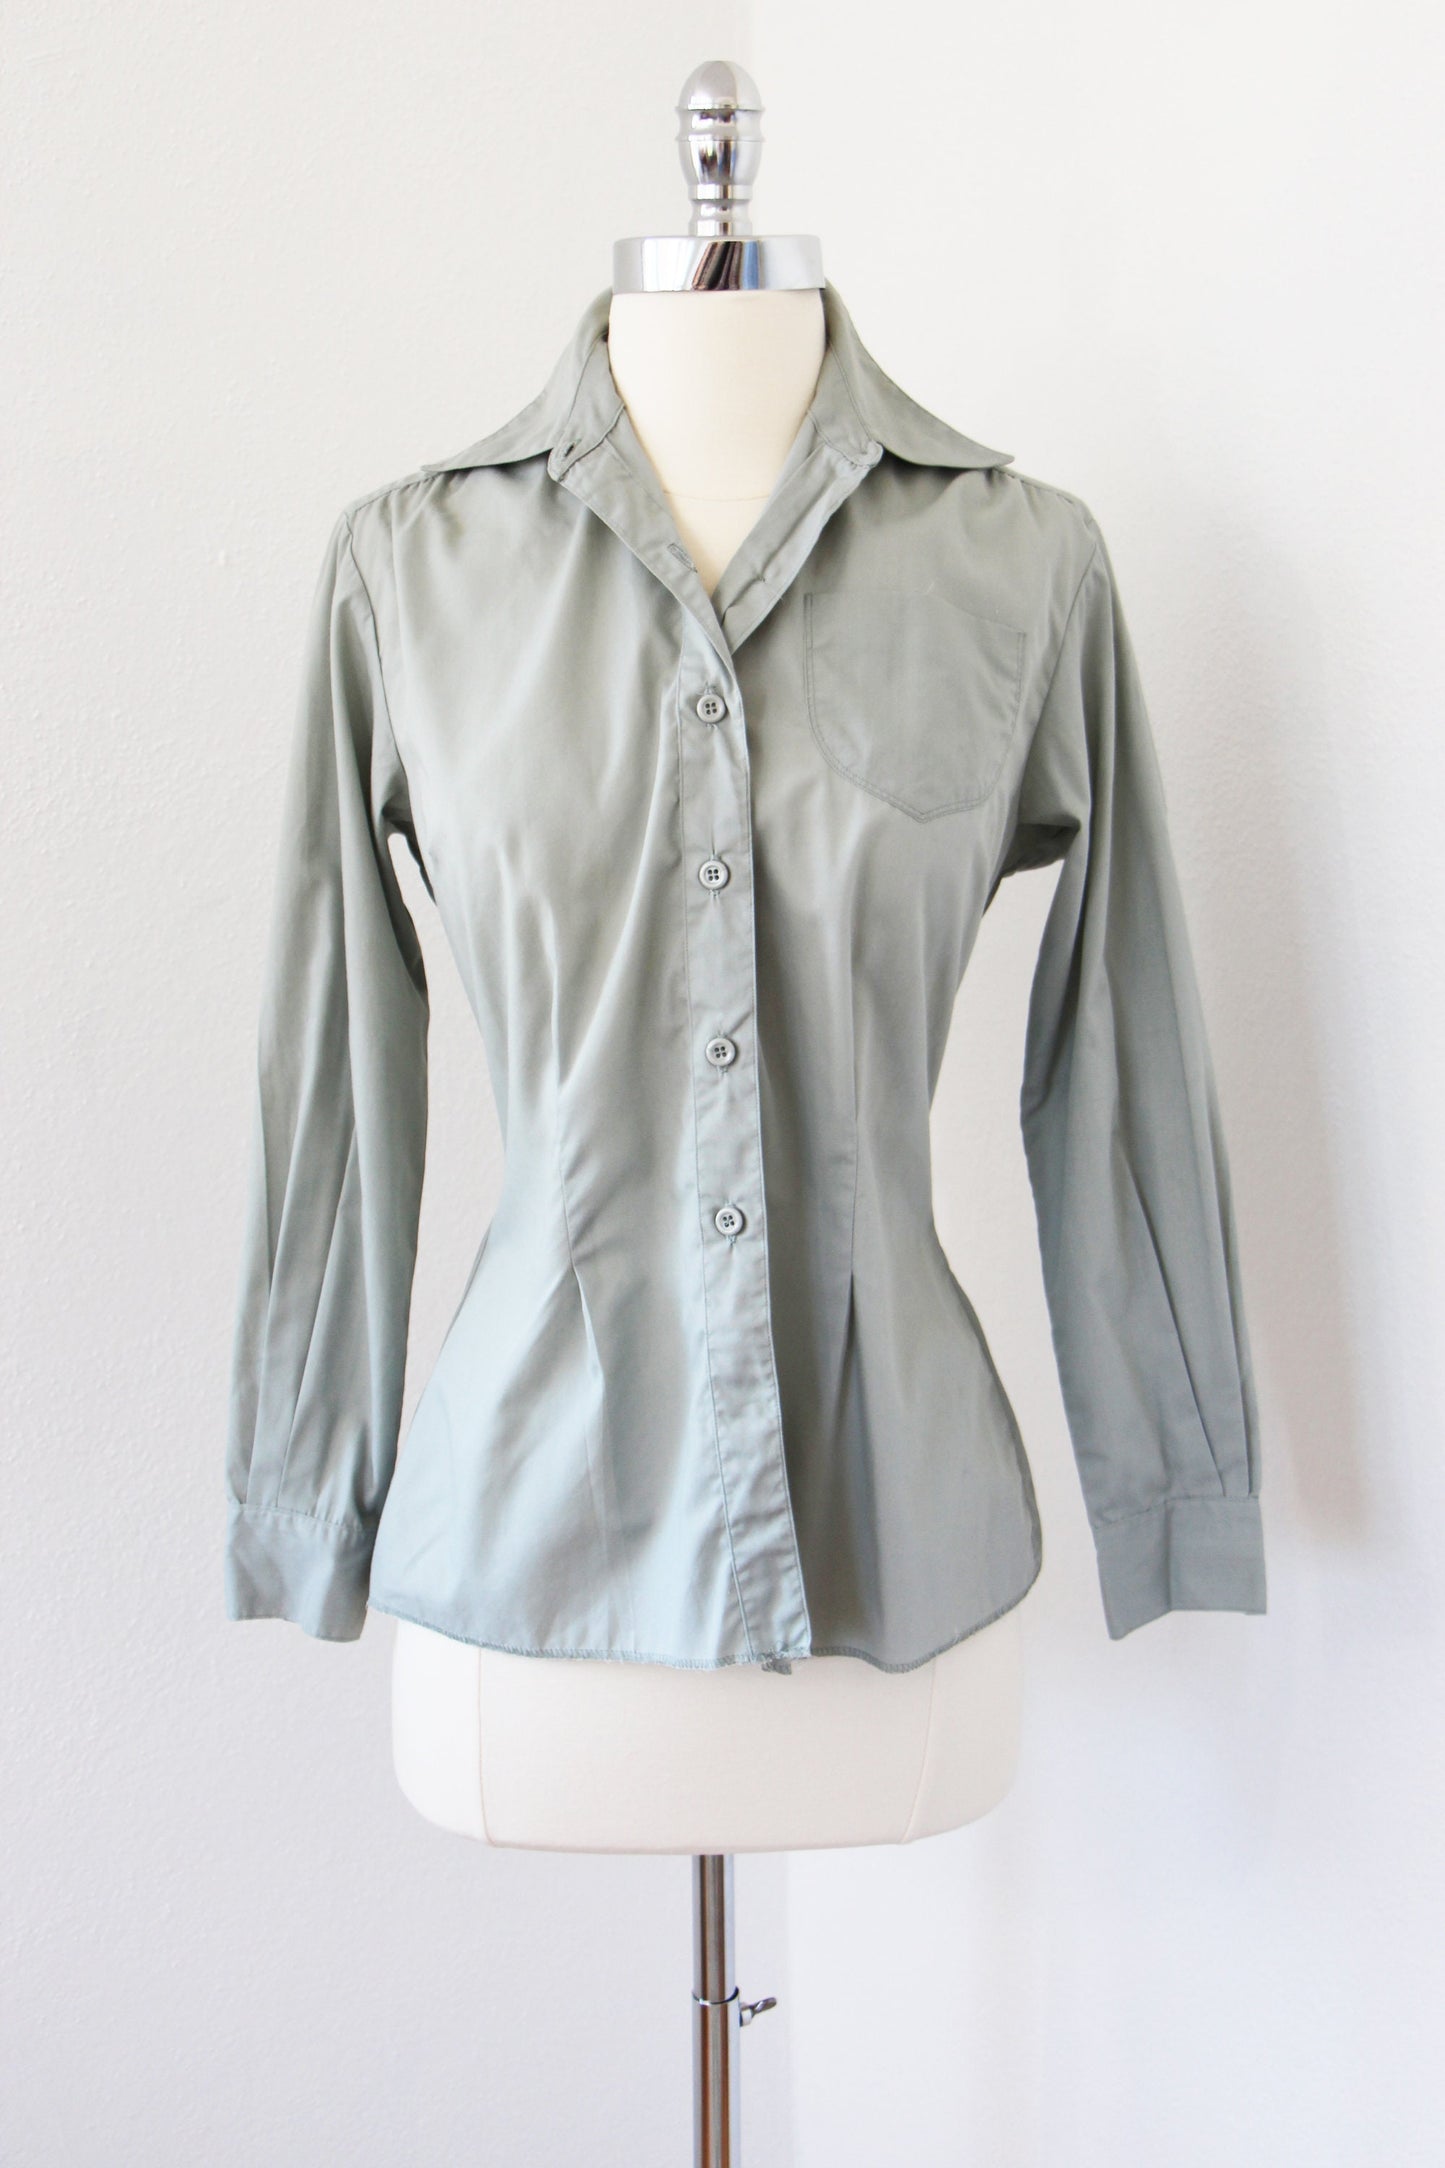 Vintage 1970s Marine Corps Blouse Military USMC Uniform Tapered Cotton Blend Shirt in Pale Misty Green Grey - Choose Your Size